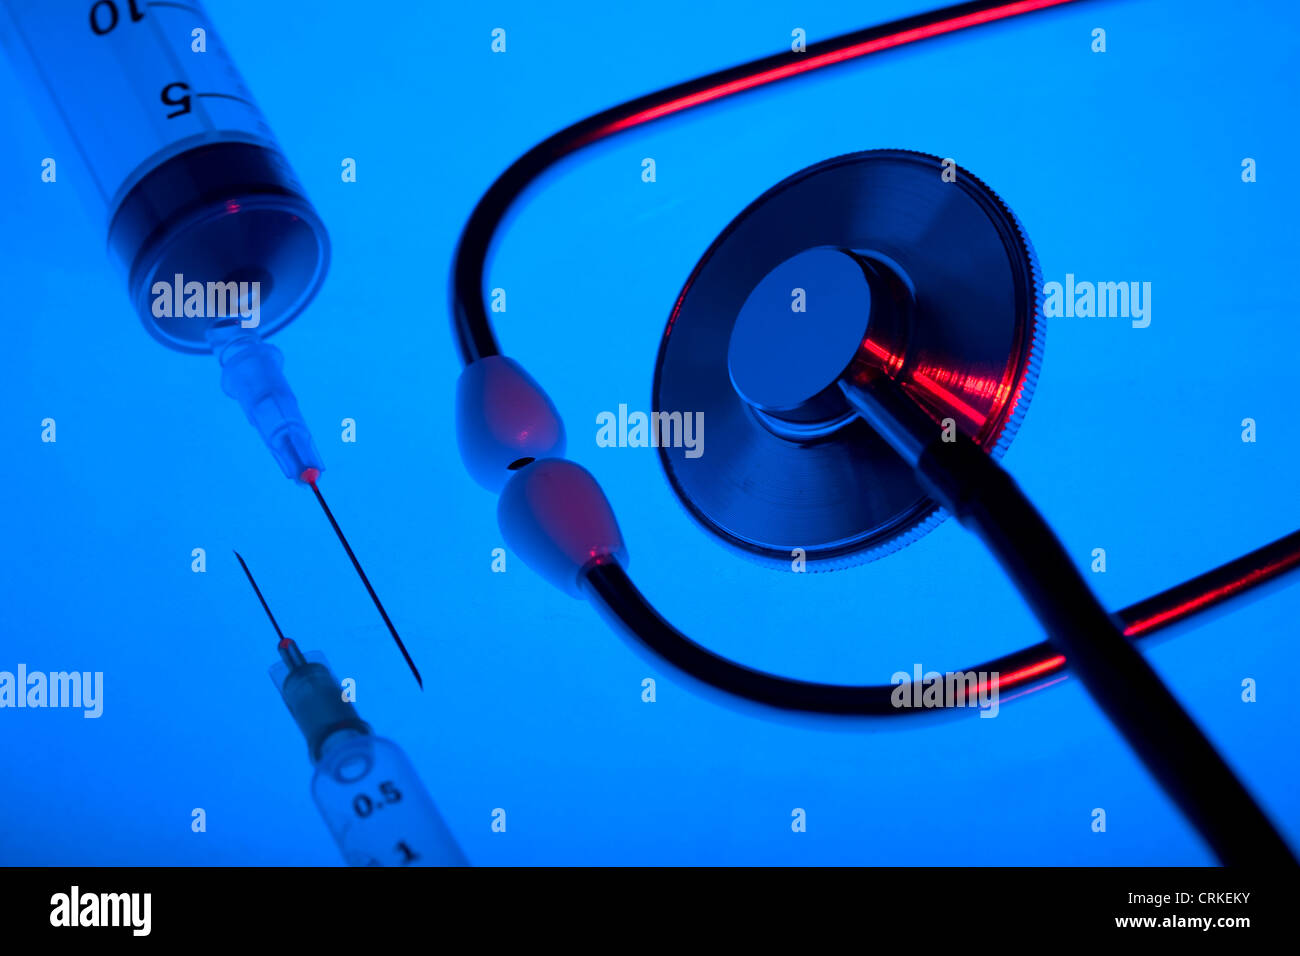 stethoscope with two syringes Stock Photo